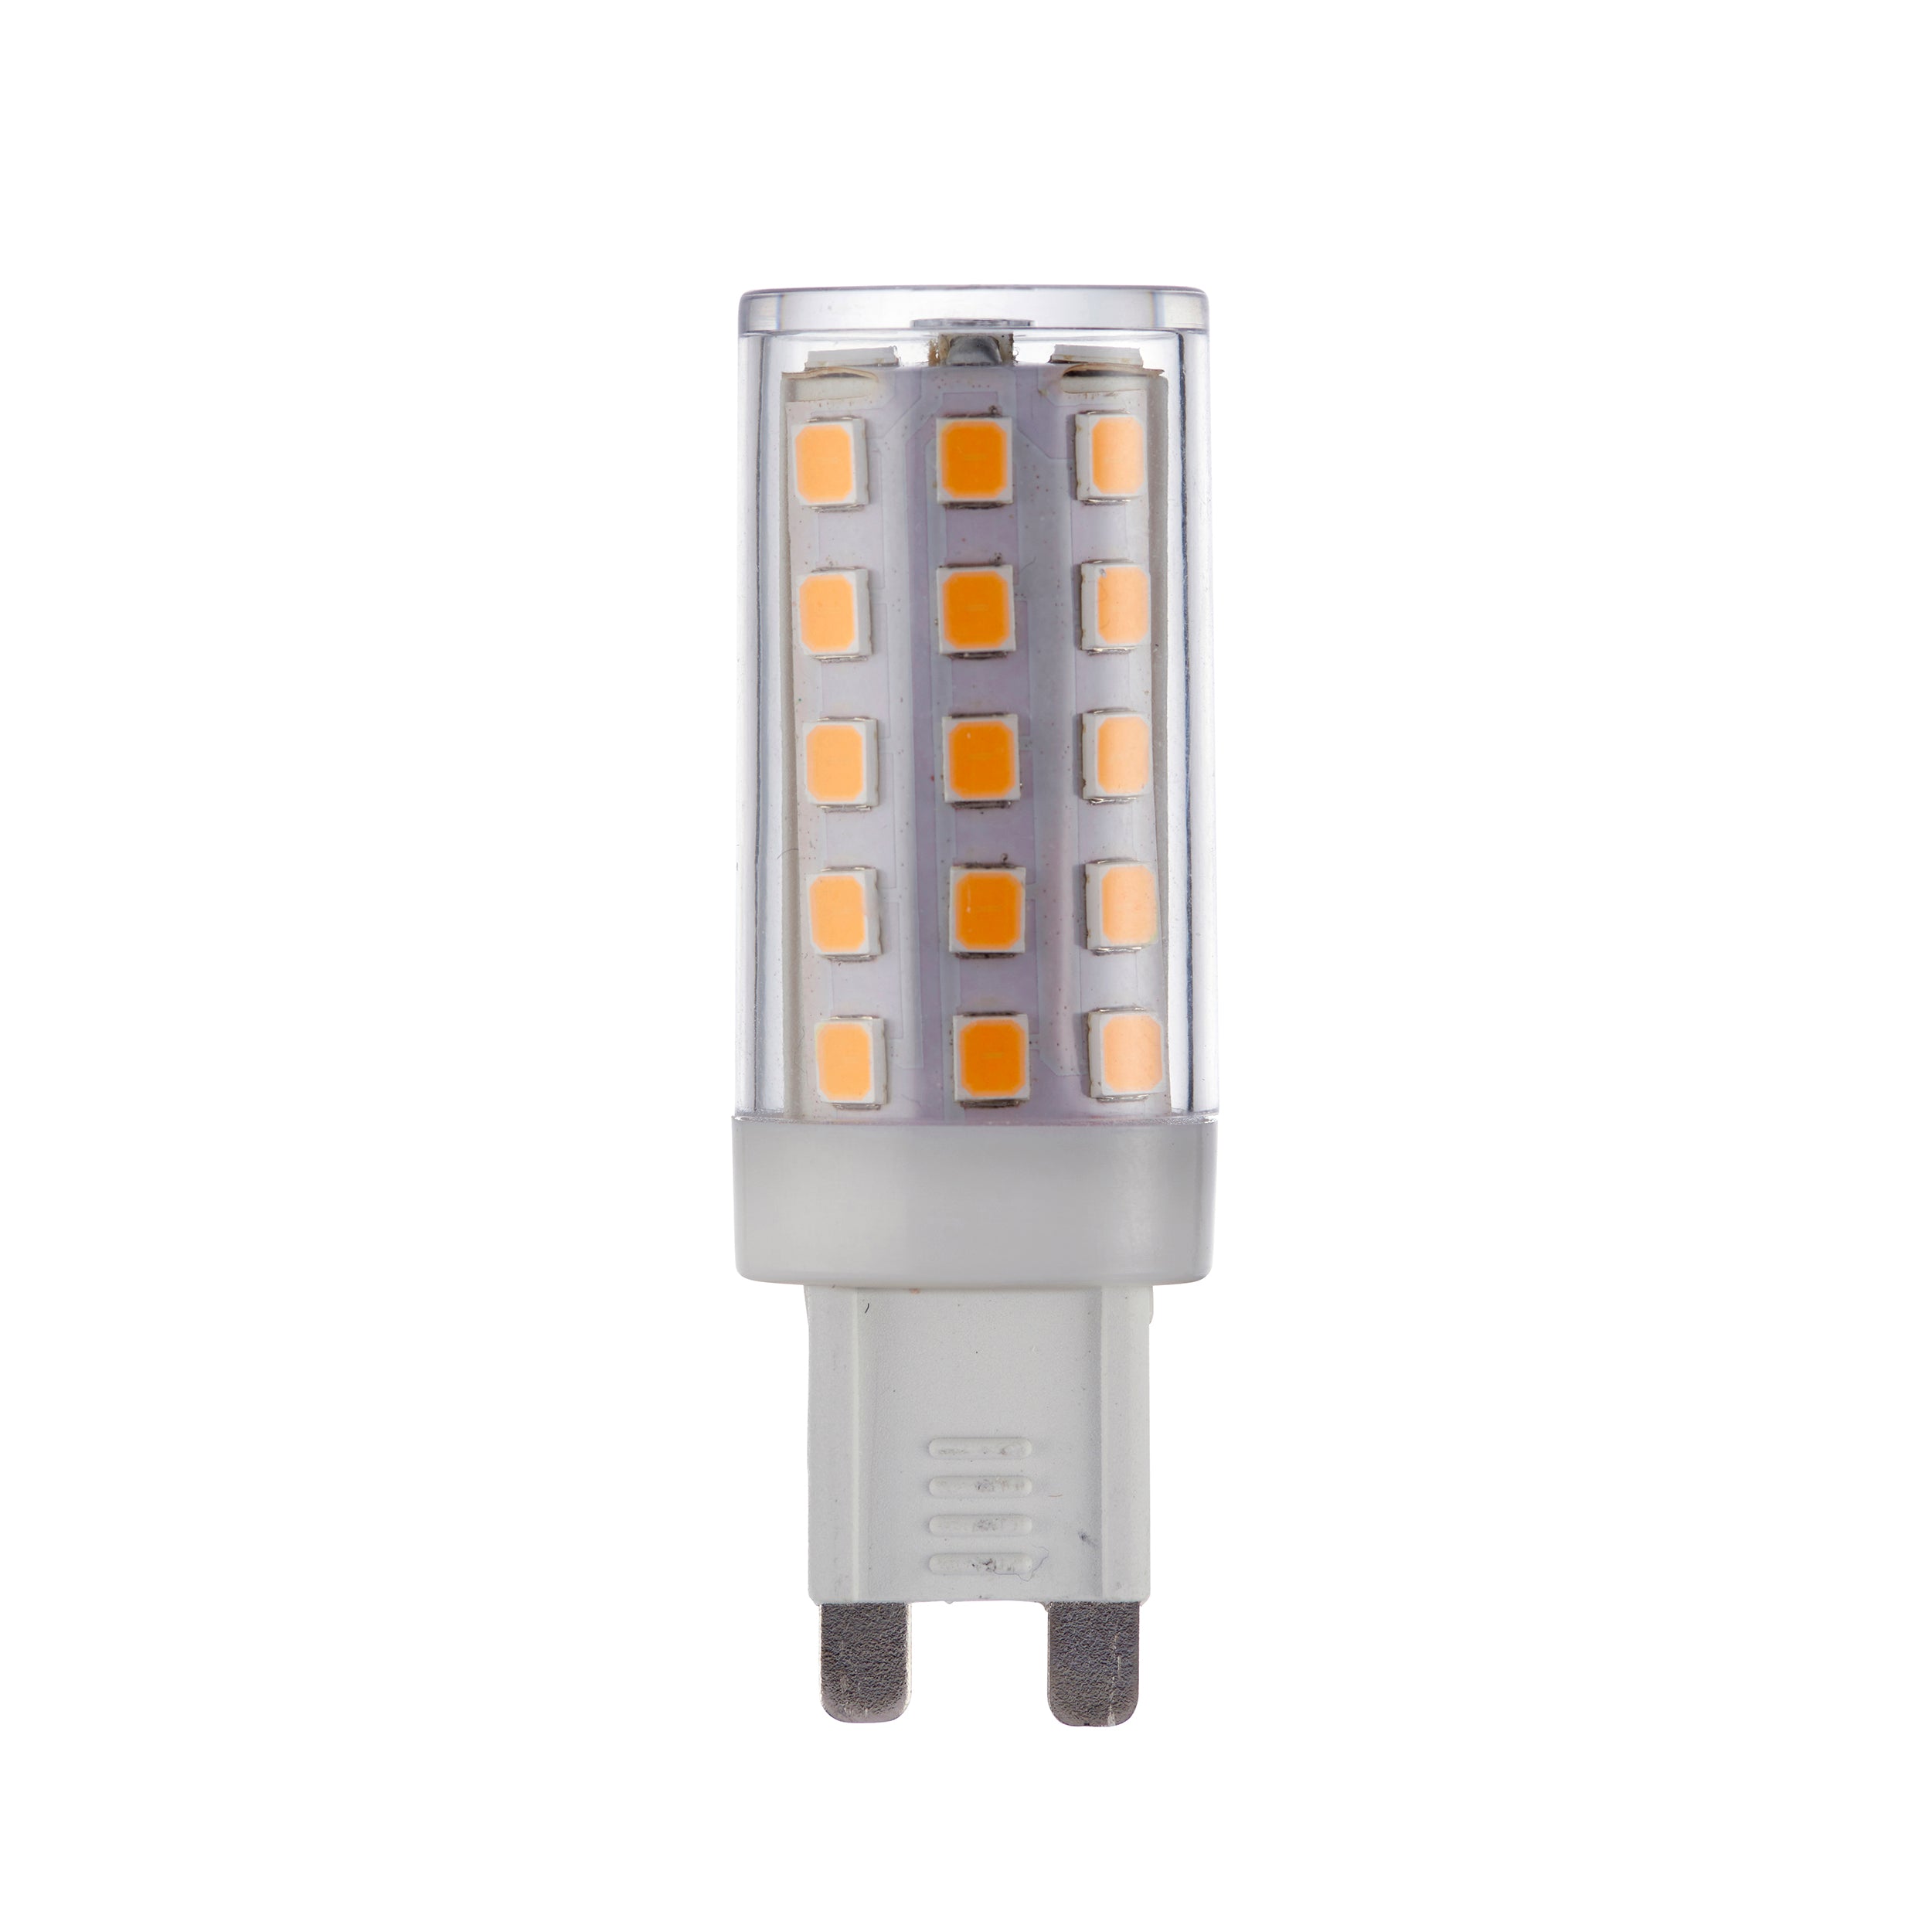 G9 LED bulb capsule. Warm White 3000K 4.8W 470lm. Dimmable